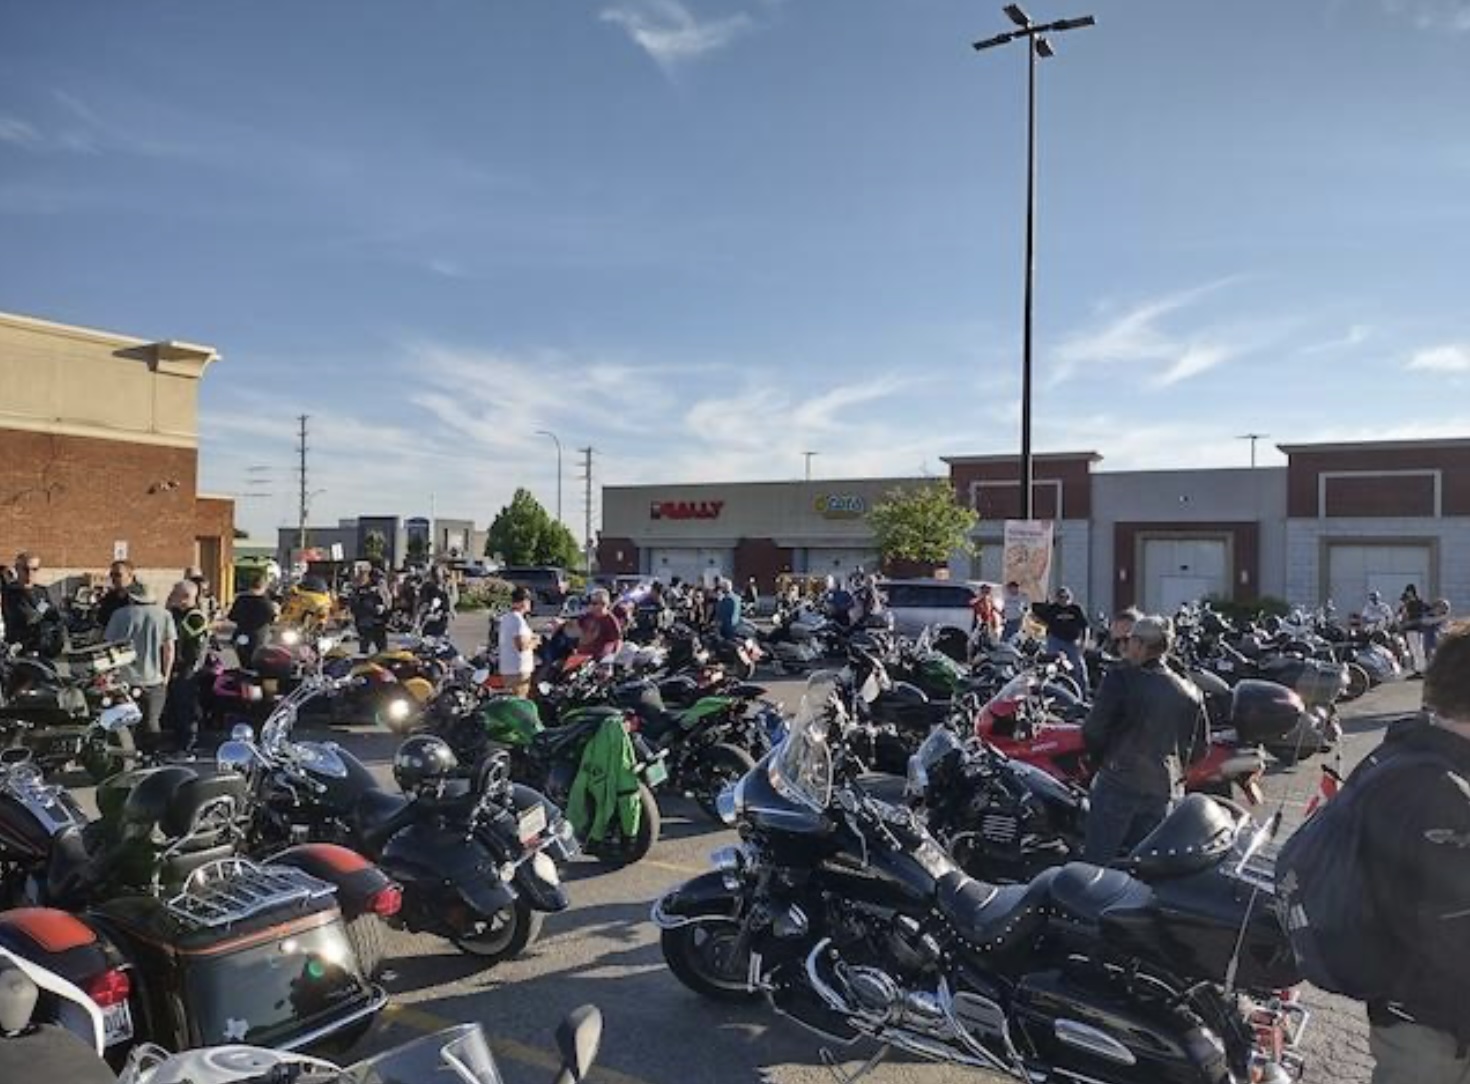 A strip mall parking lot on a summer afternoon filled with rows of parked motorcycles.